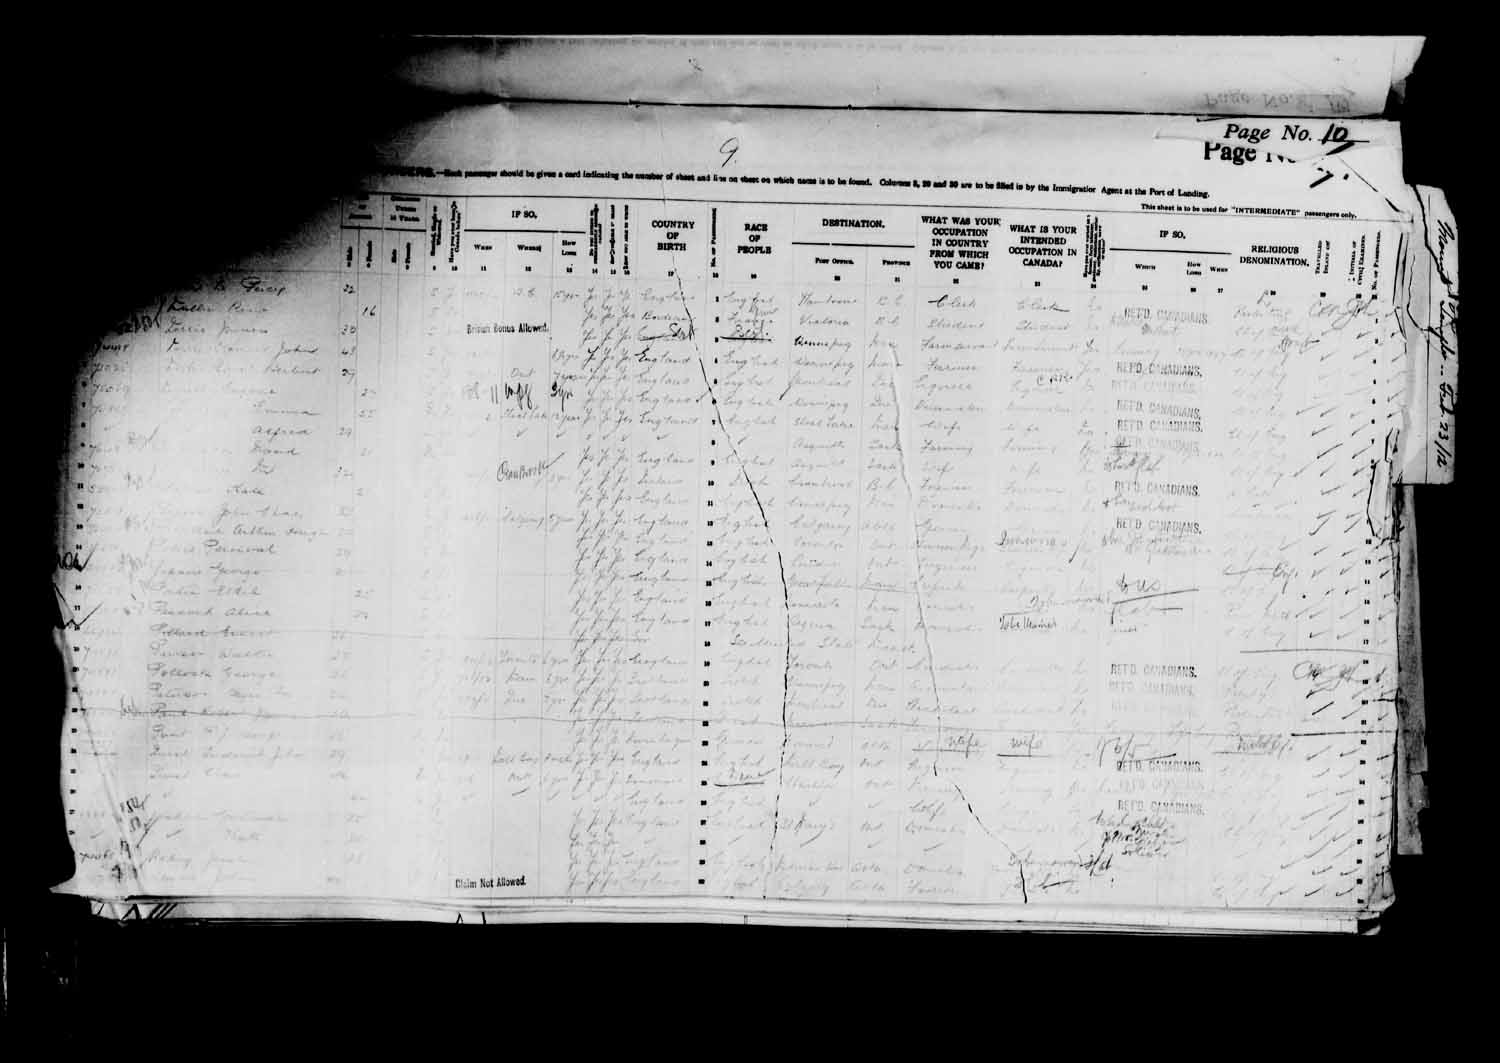 Digitized page of Passenger Lists for Image No.: e003627182